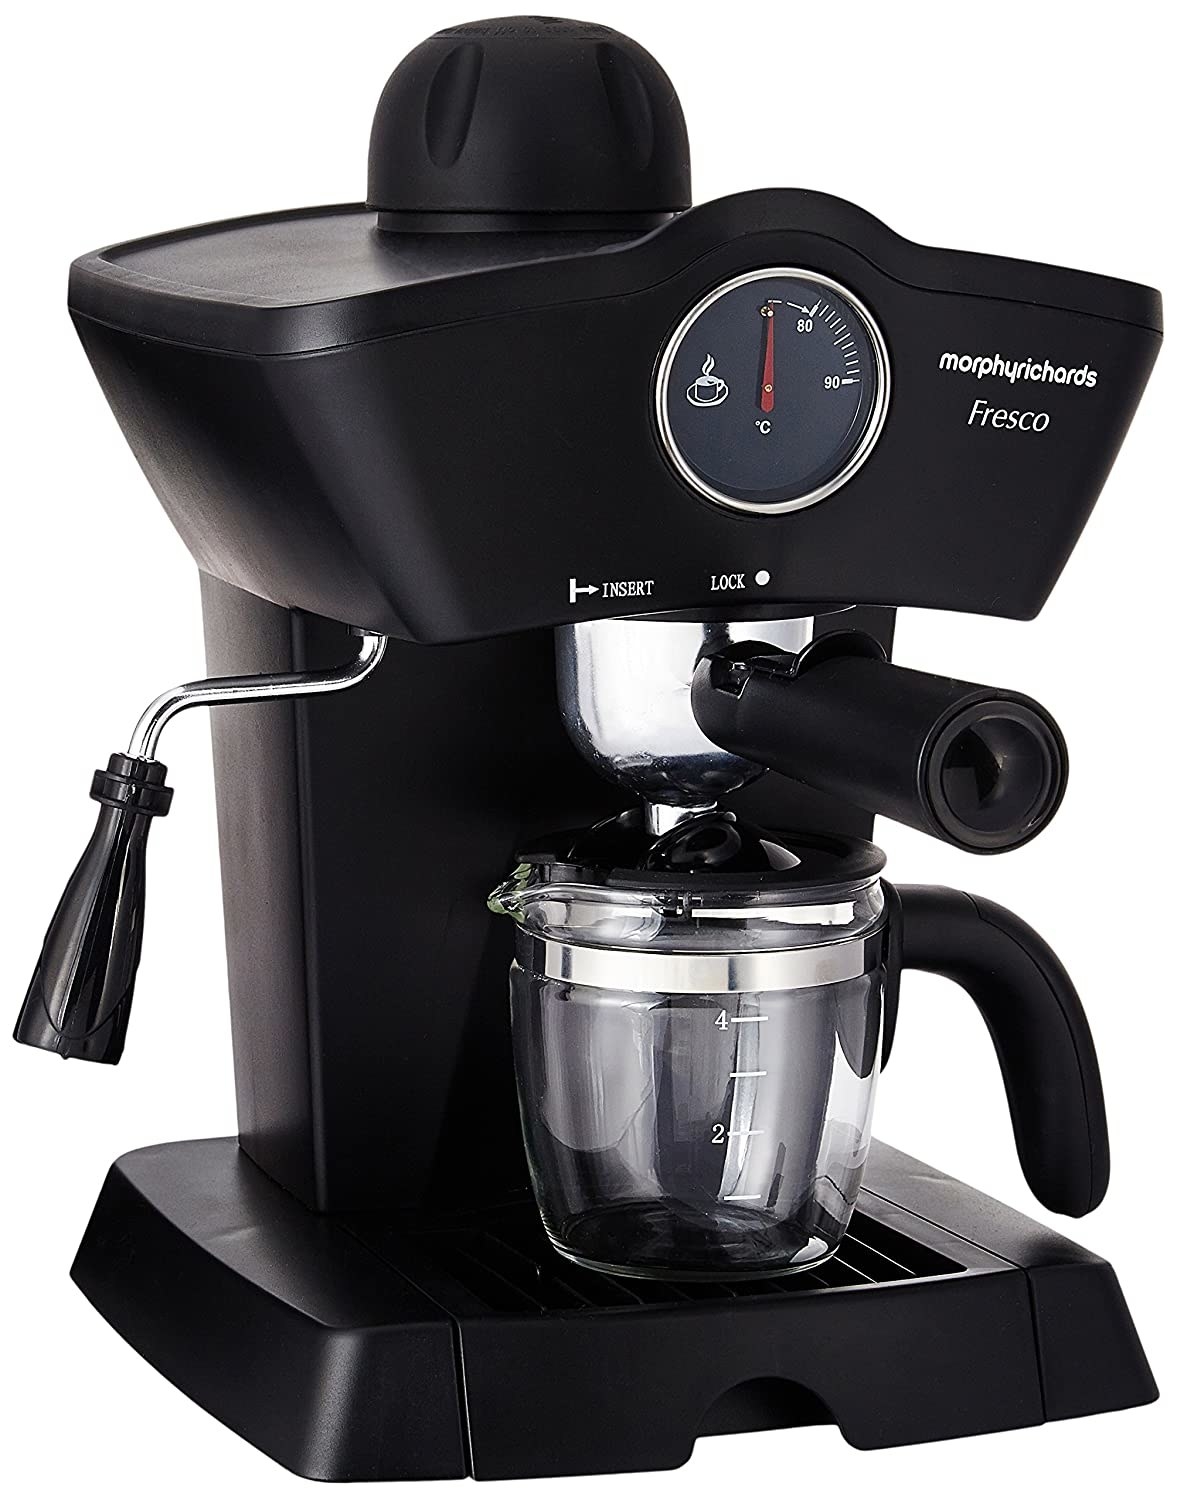 15 Coffee Machines You Should Consider If You Start Every Morning With A Cuppa